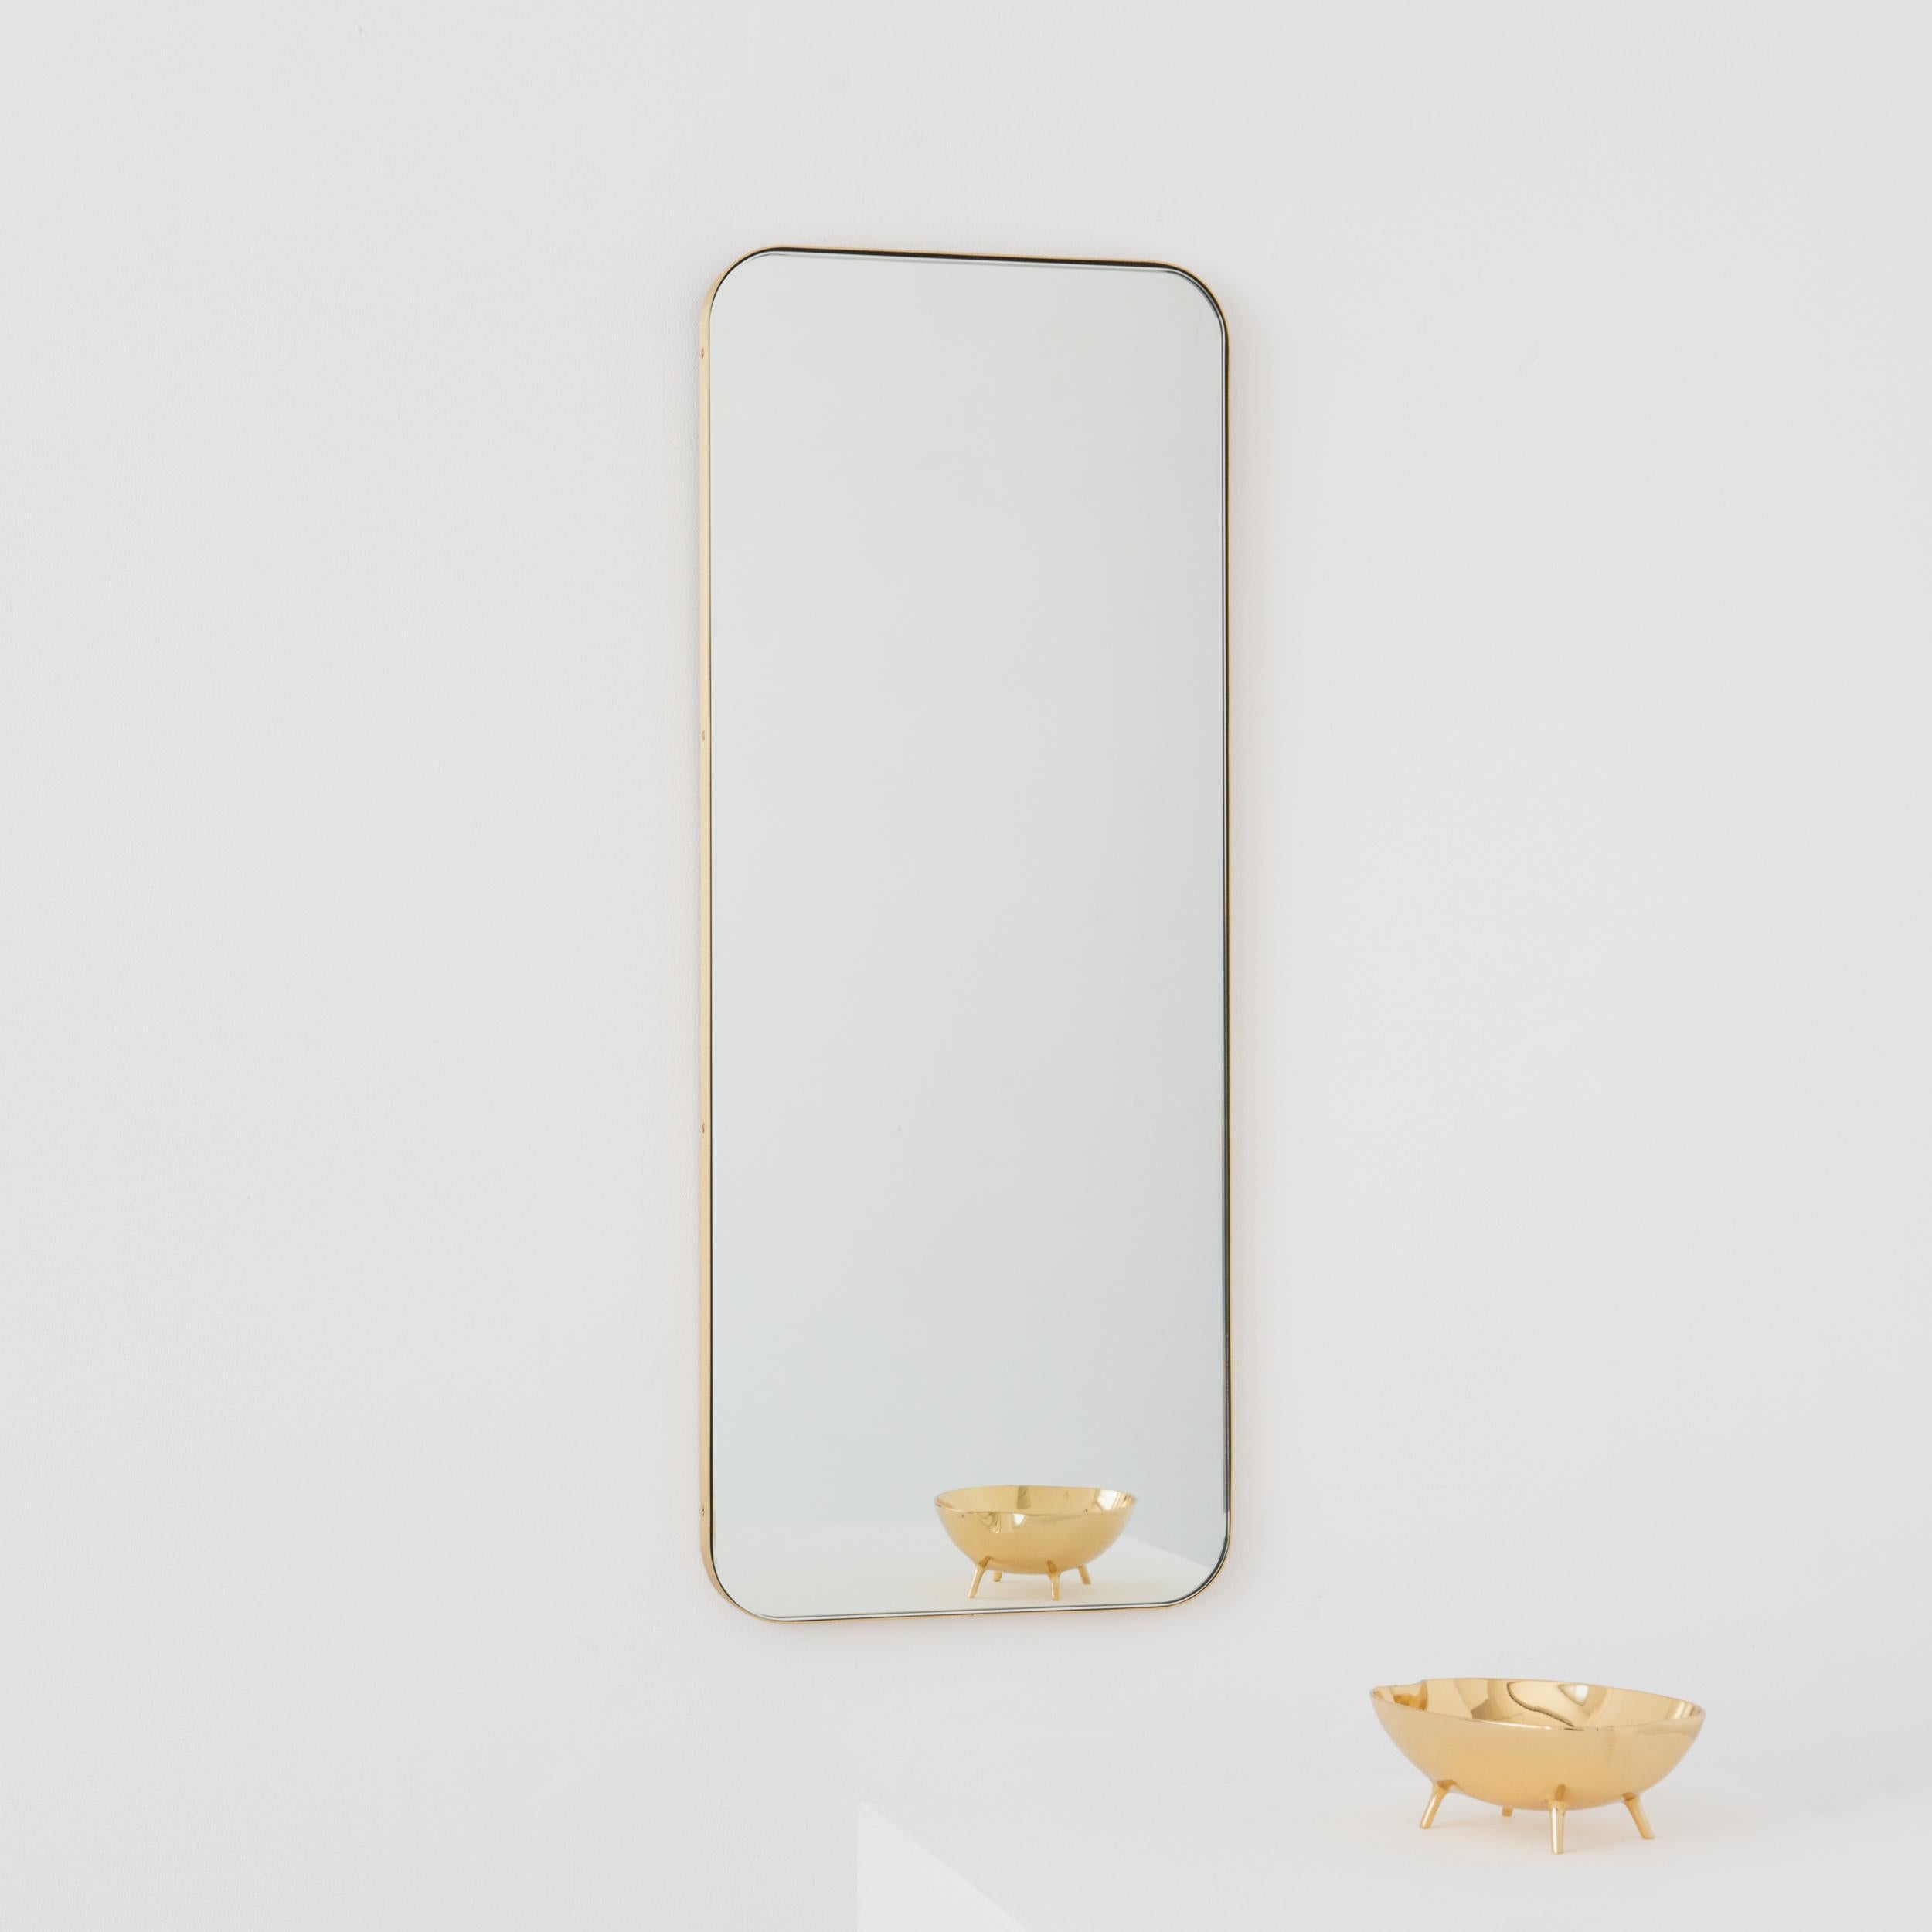 Modern Quadris™ rectangular mirror with an elegant solid brushed brass frame. Designed and handcrafted in London, UK. 

Our mirrors are designed with an integrated French cleat (split batten) system that ensures the mirror is securely mounted flush